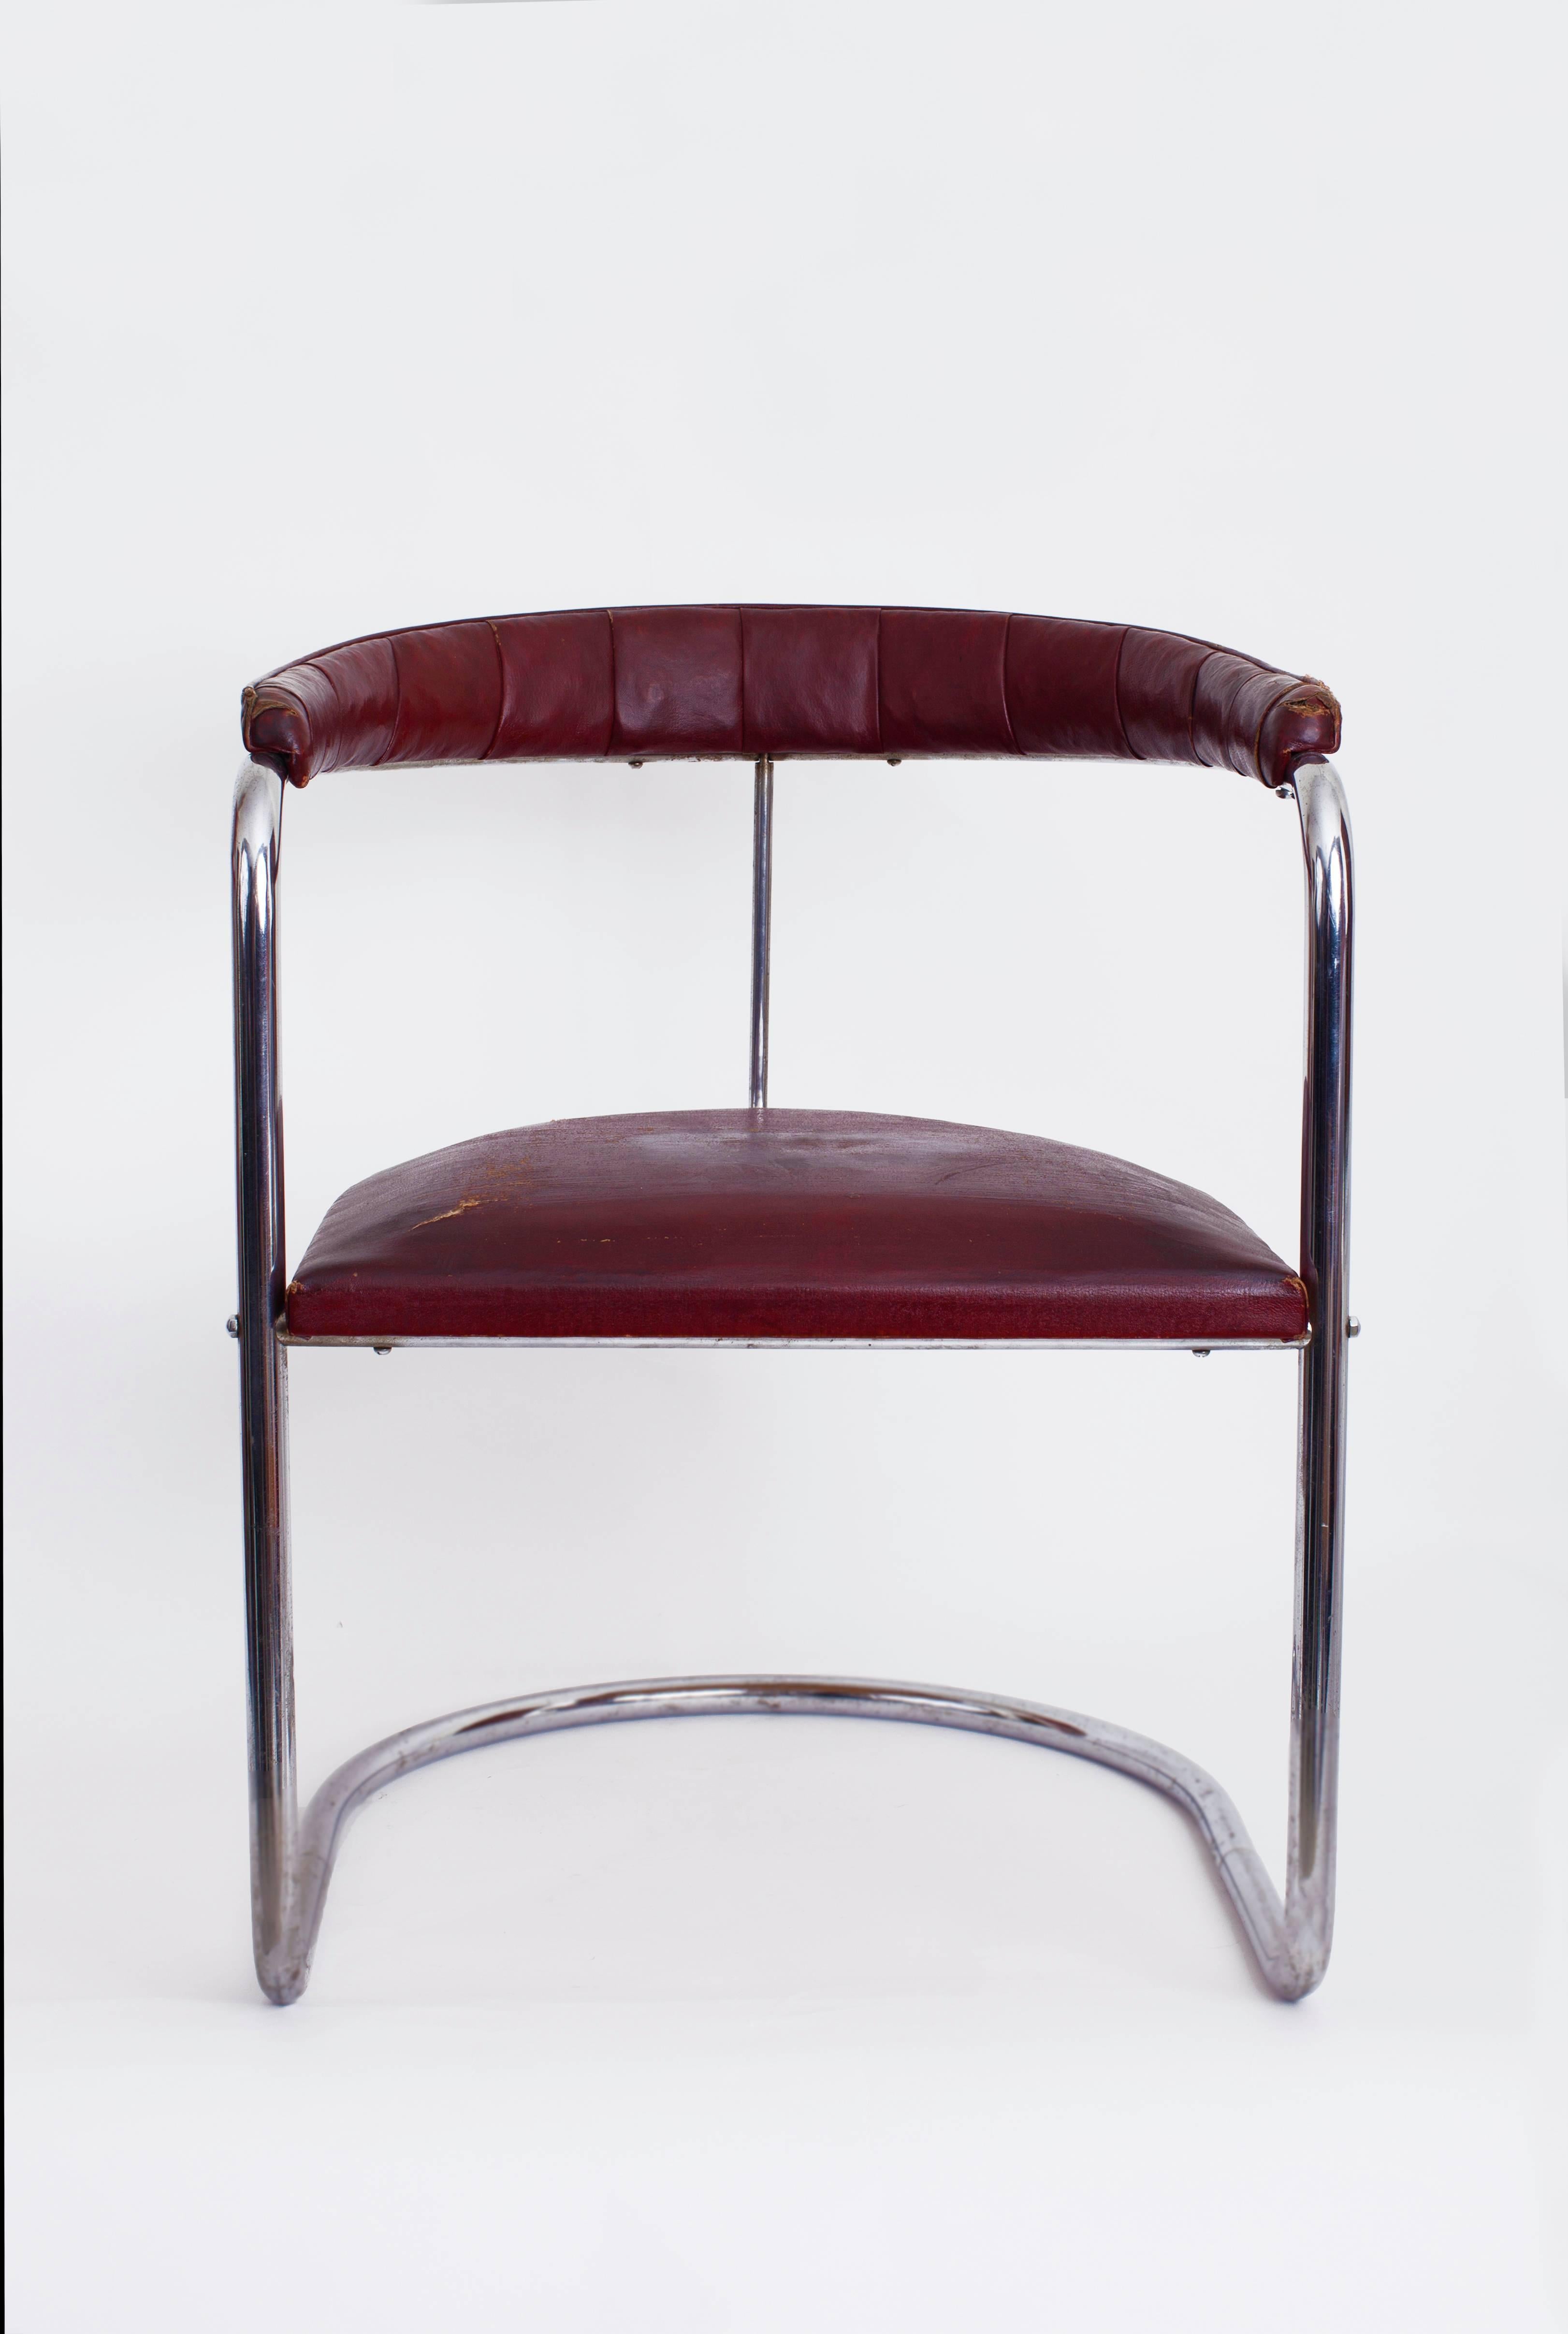 German Original Anton Lorenz for Thonet Cantilevered Steel Tube SS33 Chair, 1930s For Sale